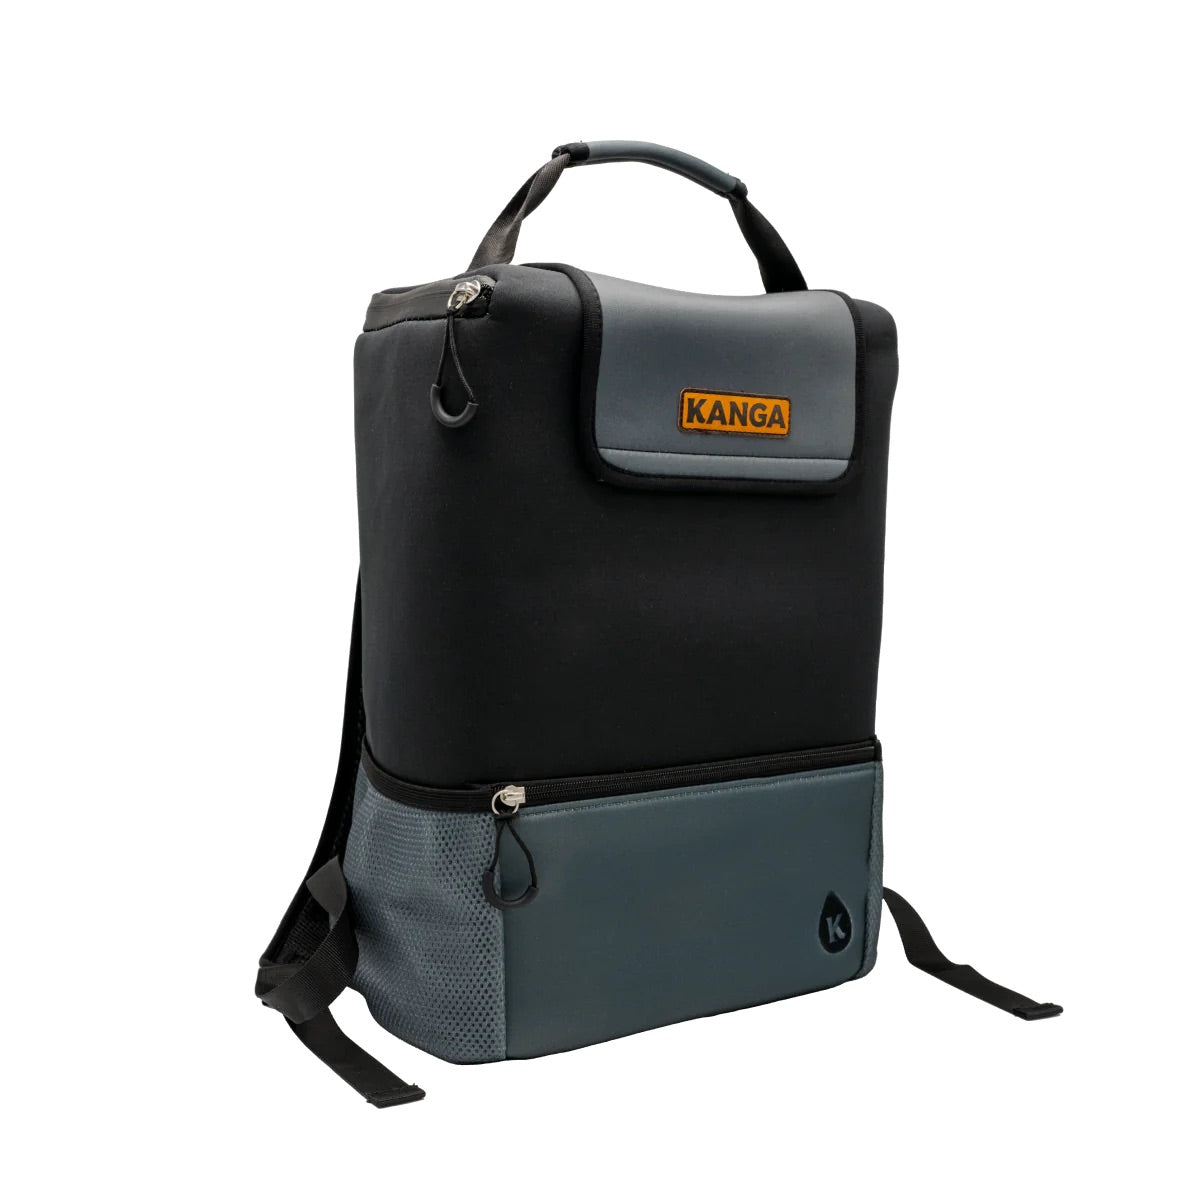 The Pouch Backpack Cooler